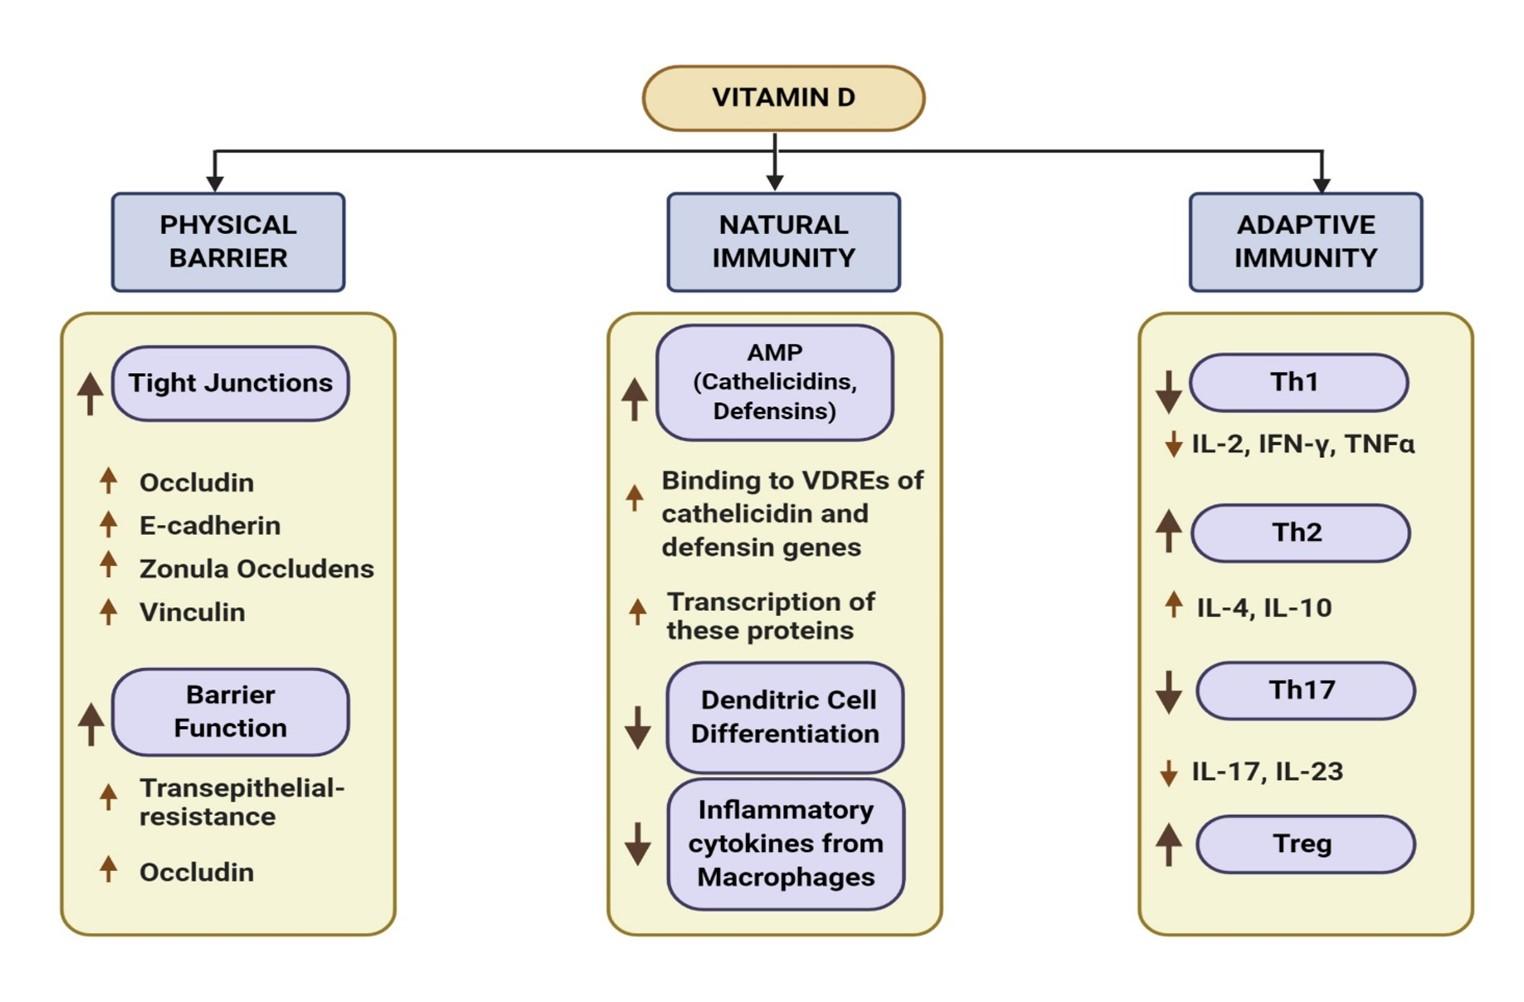 Potential roles of vitamin D in the treatment of COVID-19 patient and improving maternal and child health during pandemic